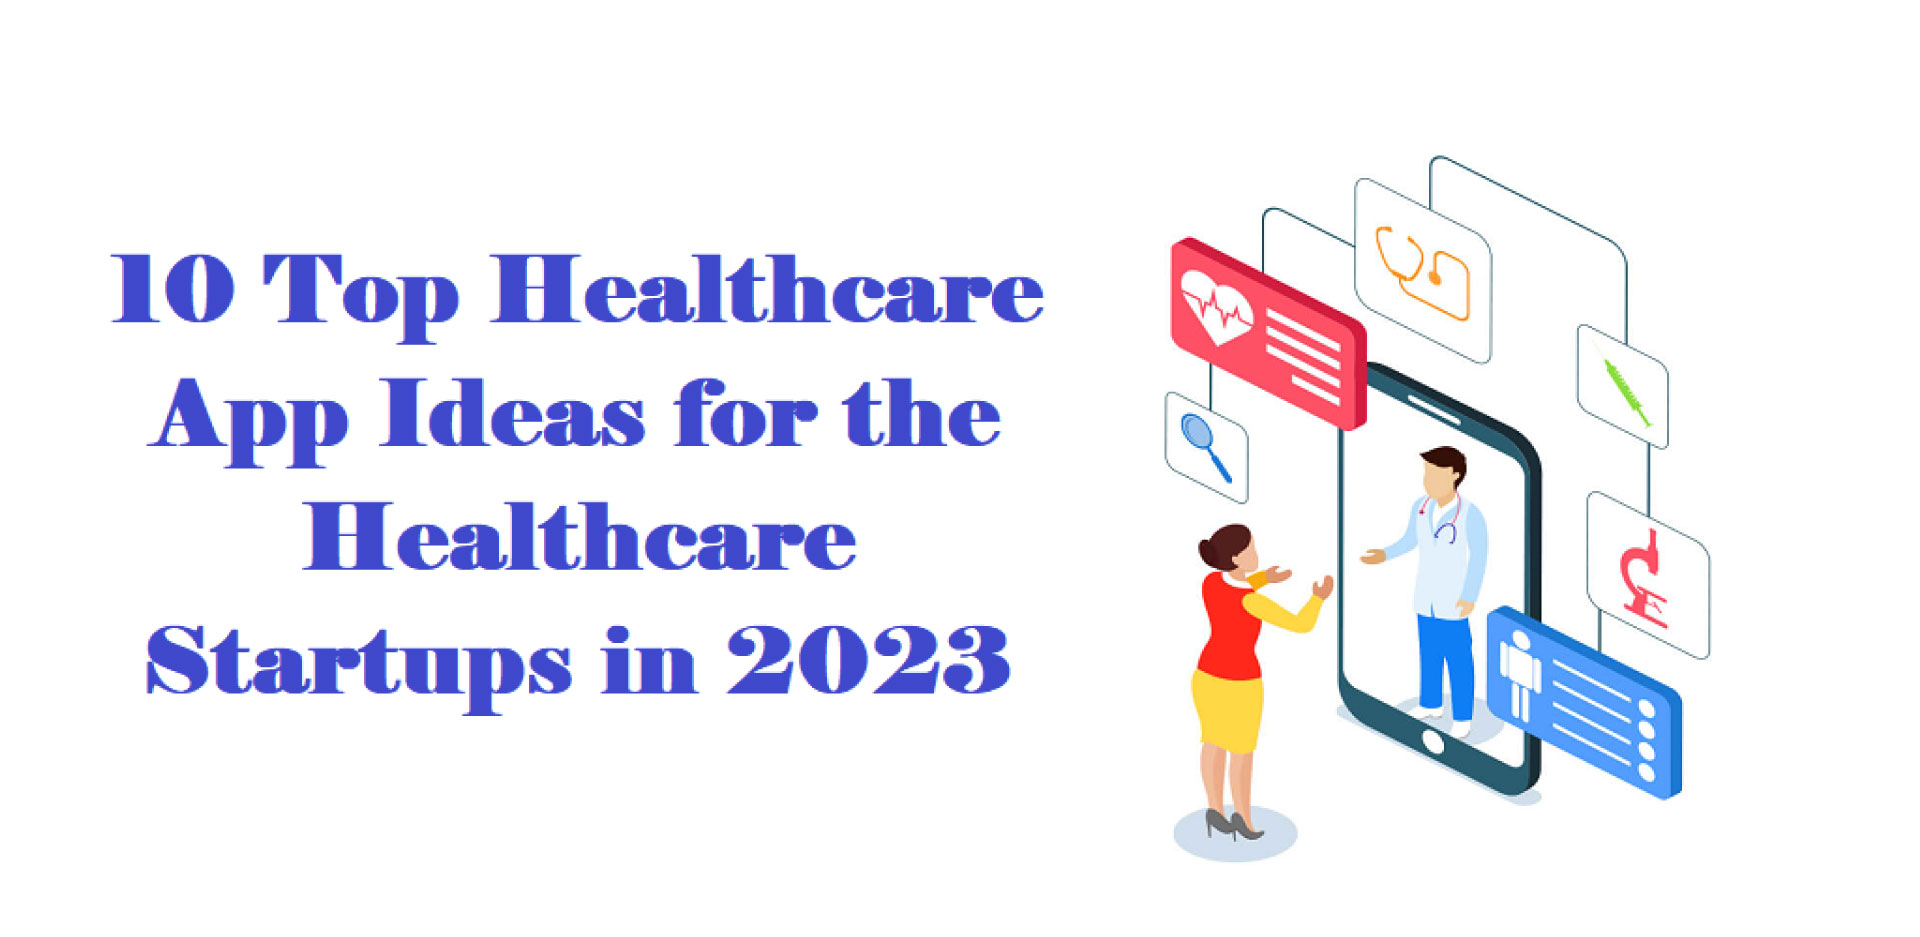 10-Top-Healthcare-App-Ideas-for-the-Healthcare-Startups-in-2023